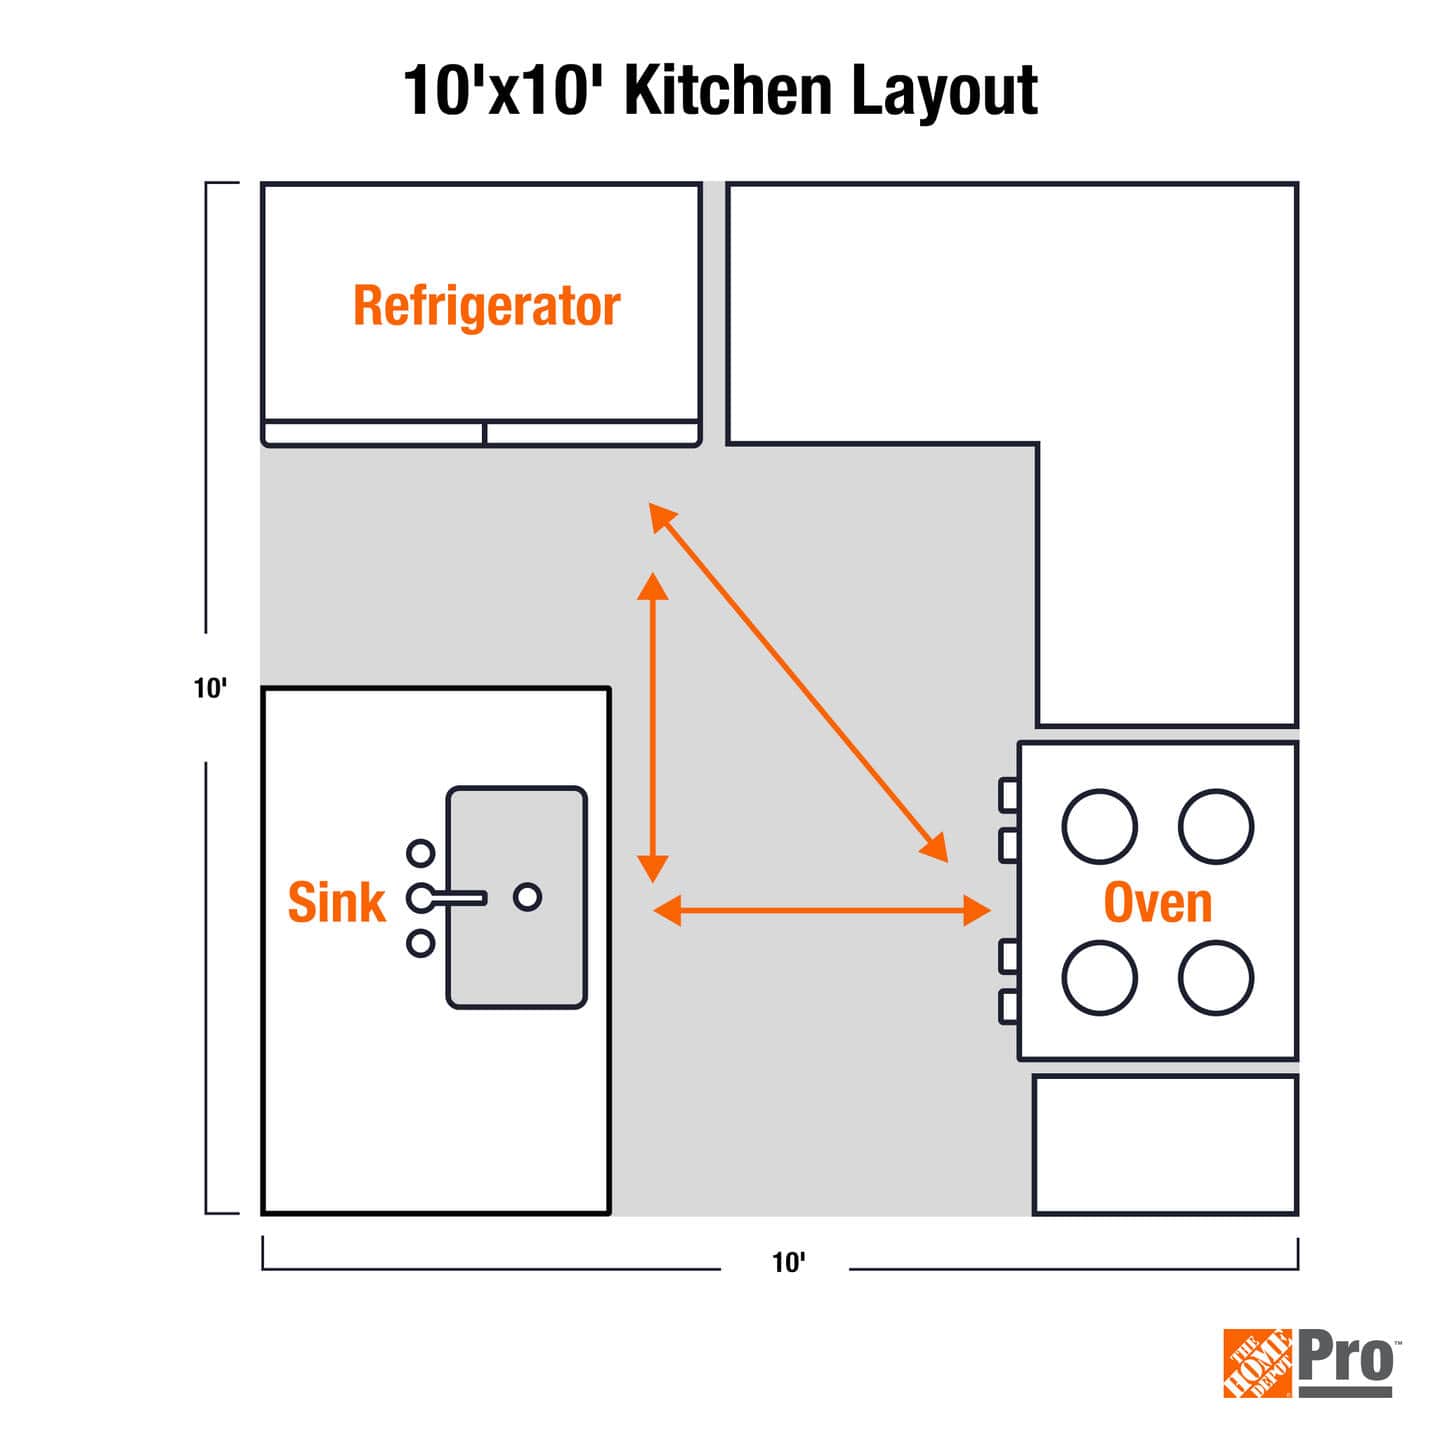 A 10x10 kitchen floor plan highlighting the work triangle